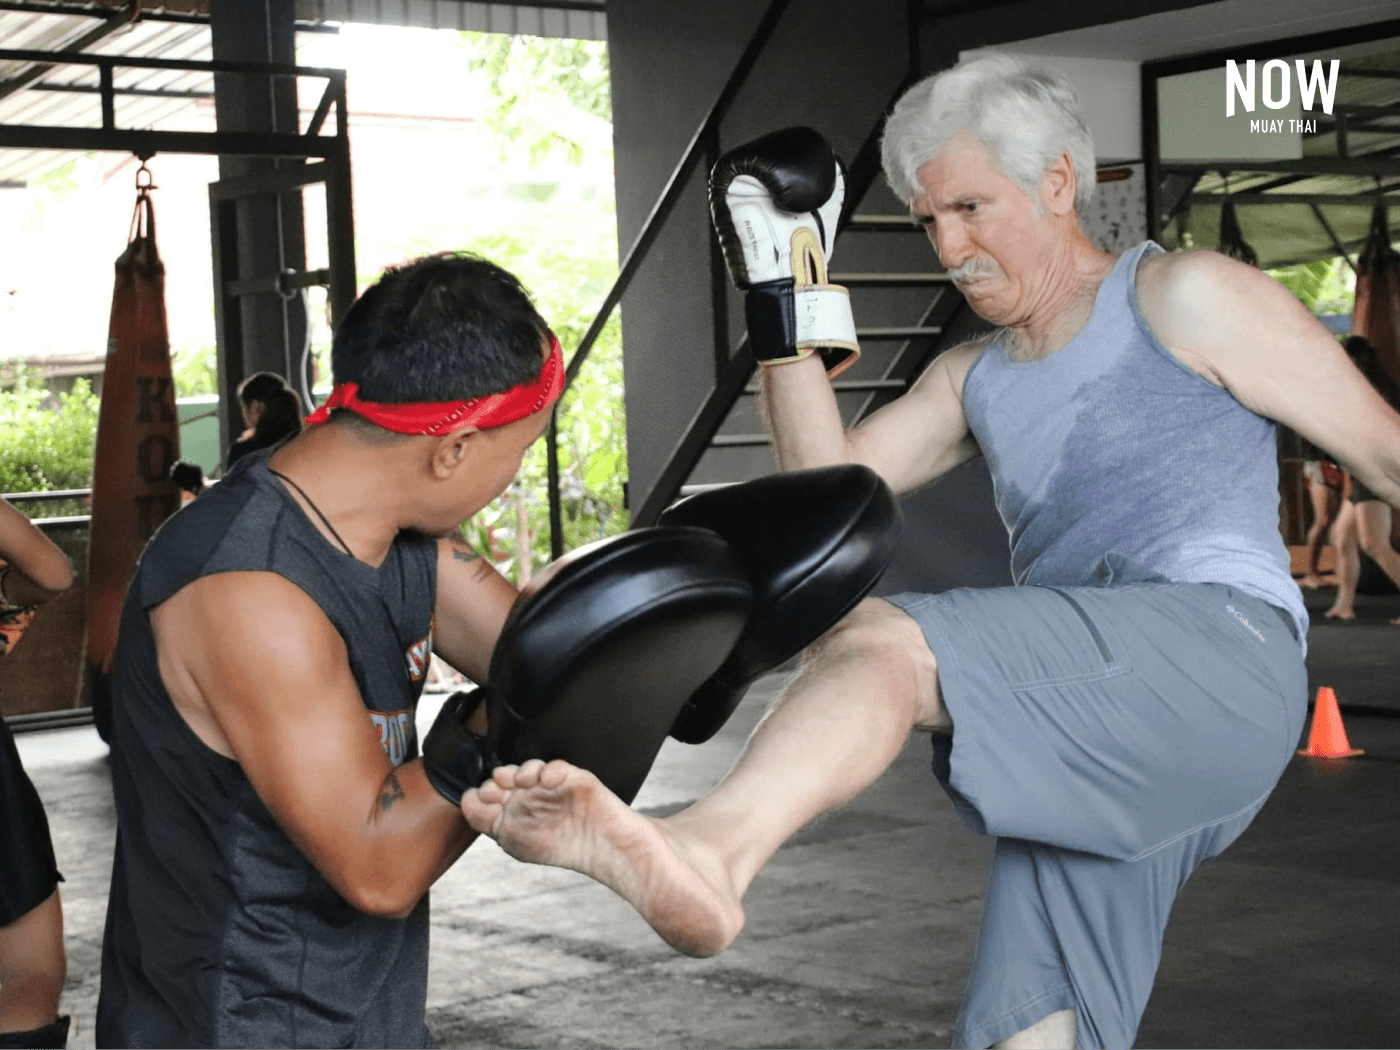 An elderly gentleman practicing pad work at Boon Lanna Muay Thai gym in Chiang Mai